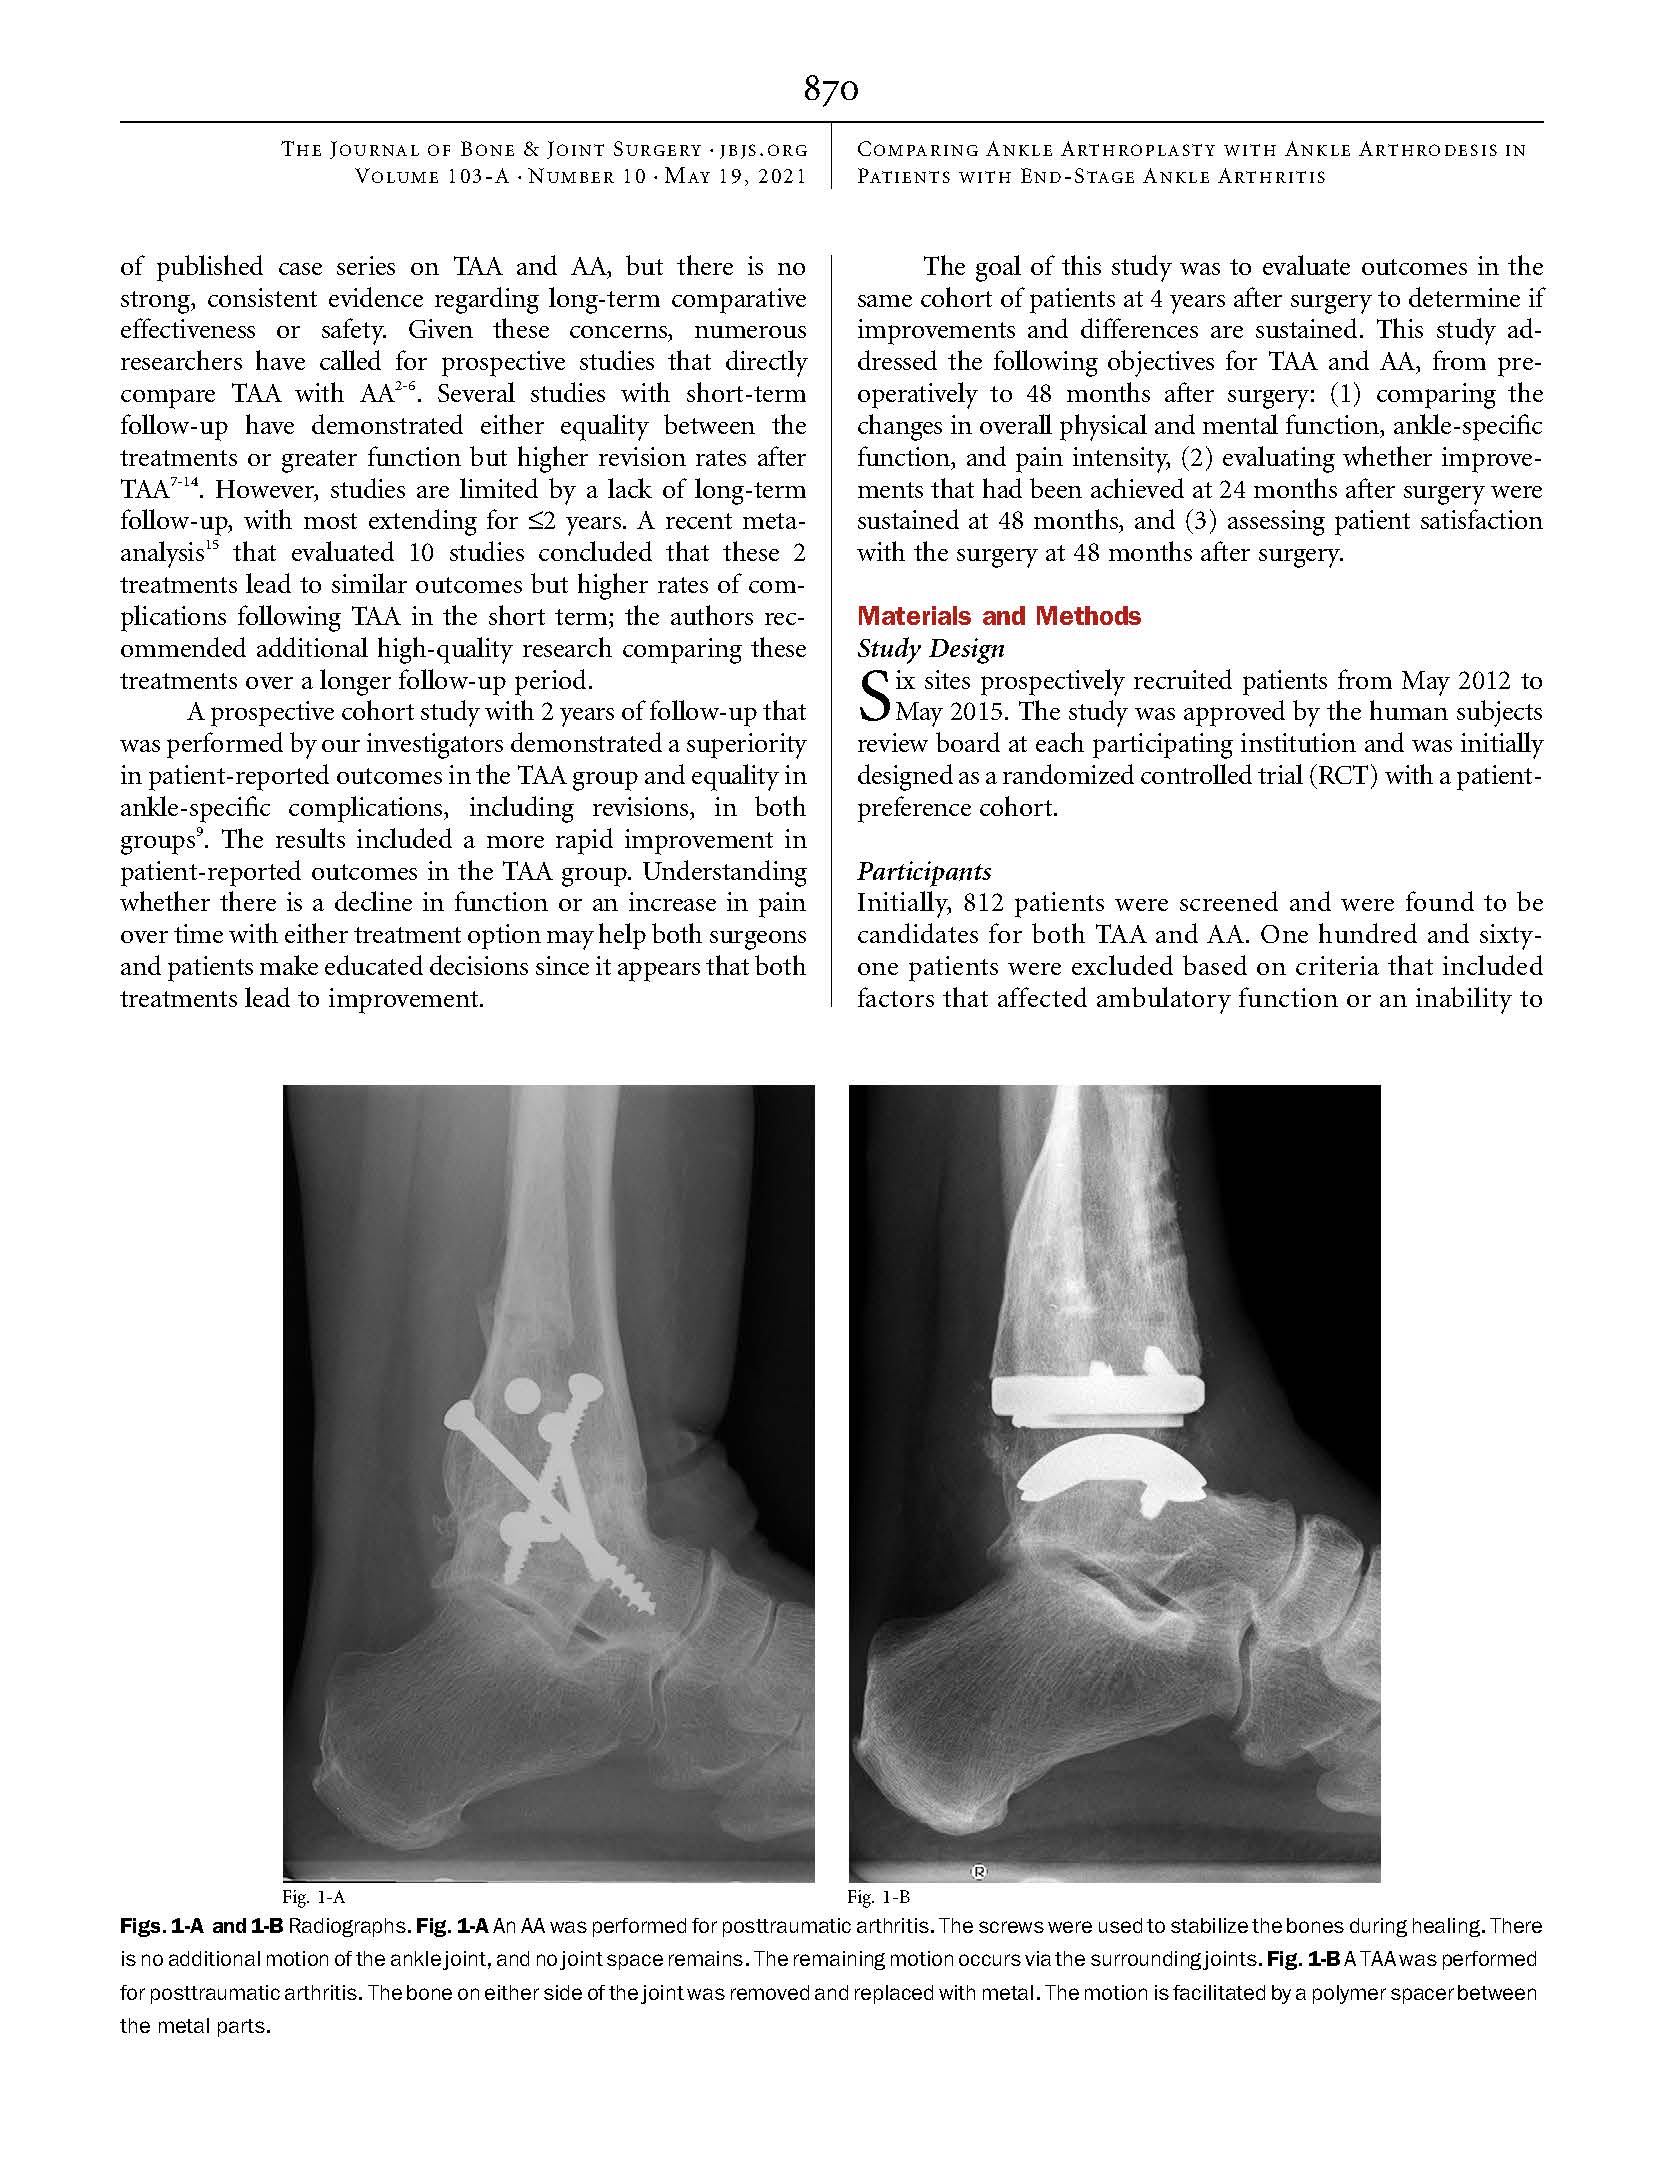 Comparing 4 Year Changes in Patient Reported.4 Page 02 Comparing 4-Year Changes in Patient-Reported Outcomes Following Ankle Arthroplasty & Arthrodesis | Amber Vance, ACNP-C, FNP